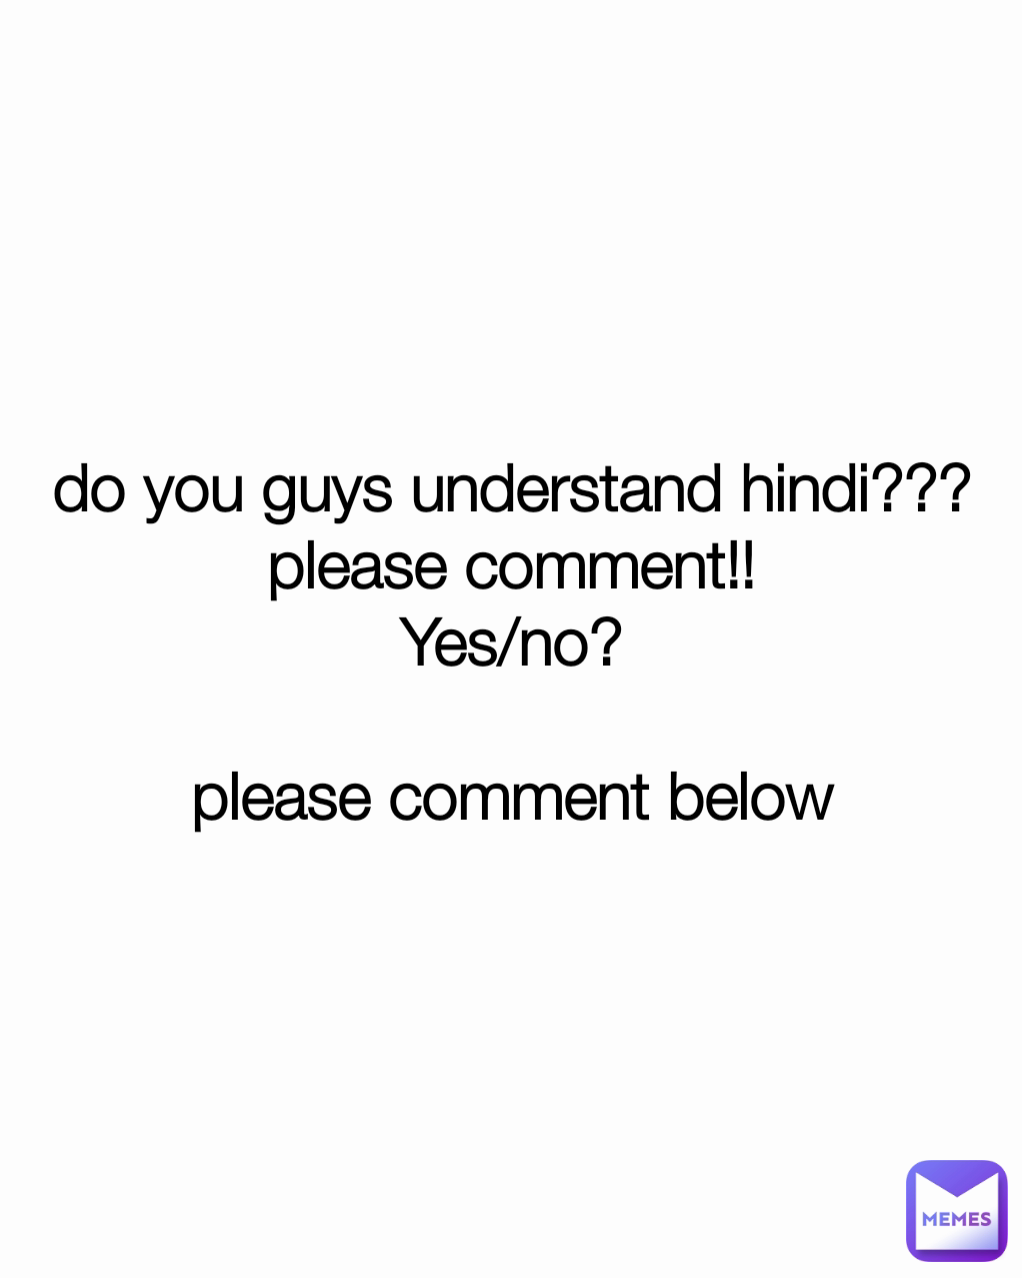 do you guys understand hindi???
please comment!!
Yes/no?

please comment below